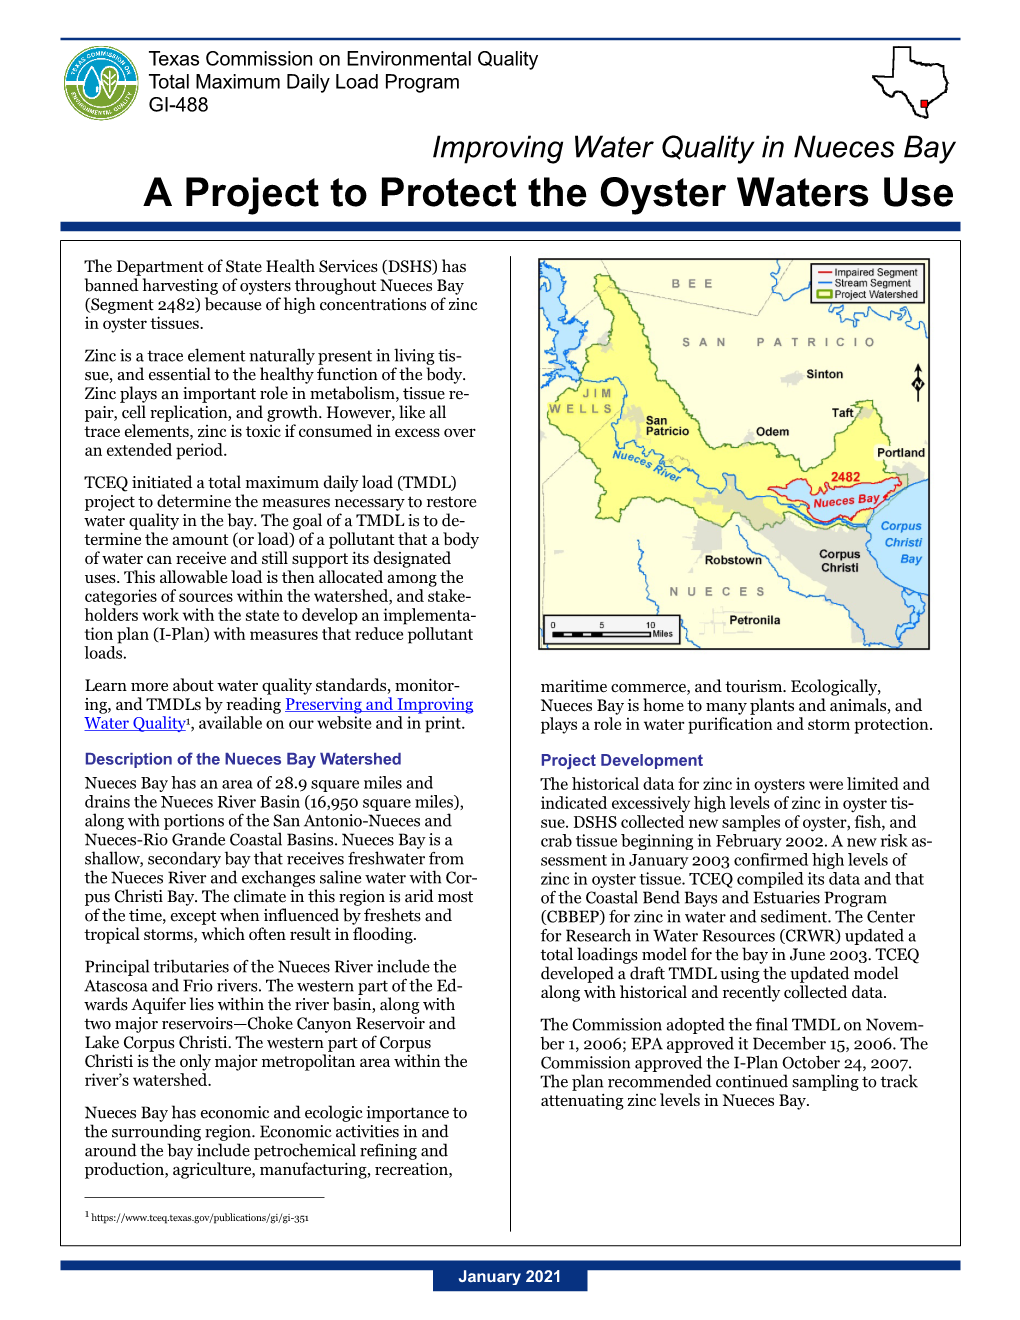 Improving Water Quality in Nueces Bay a Project to Protect the Oyster Waters Use